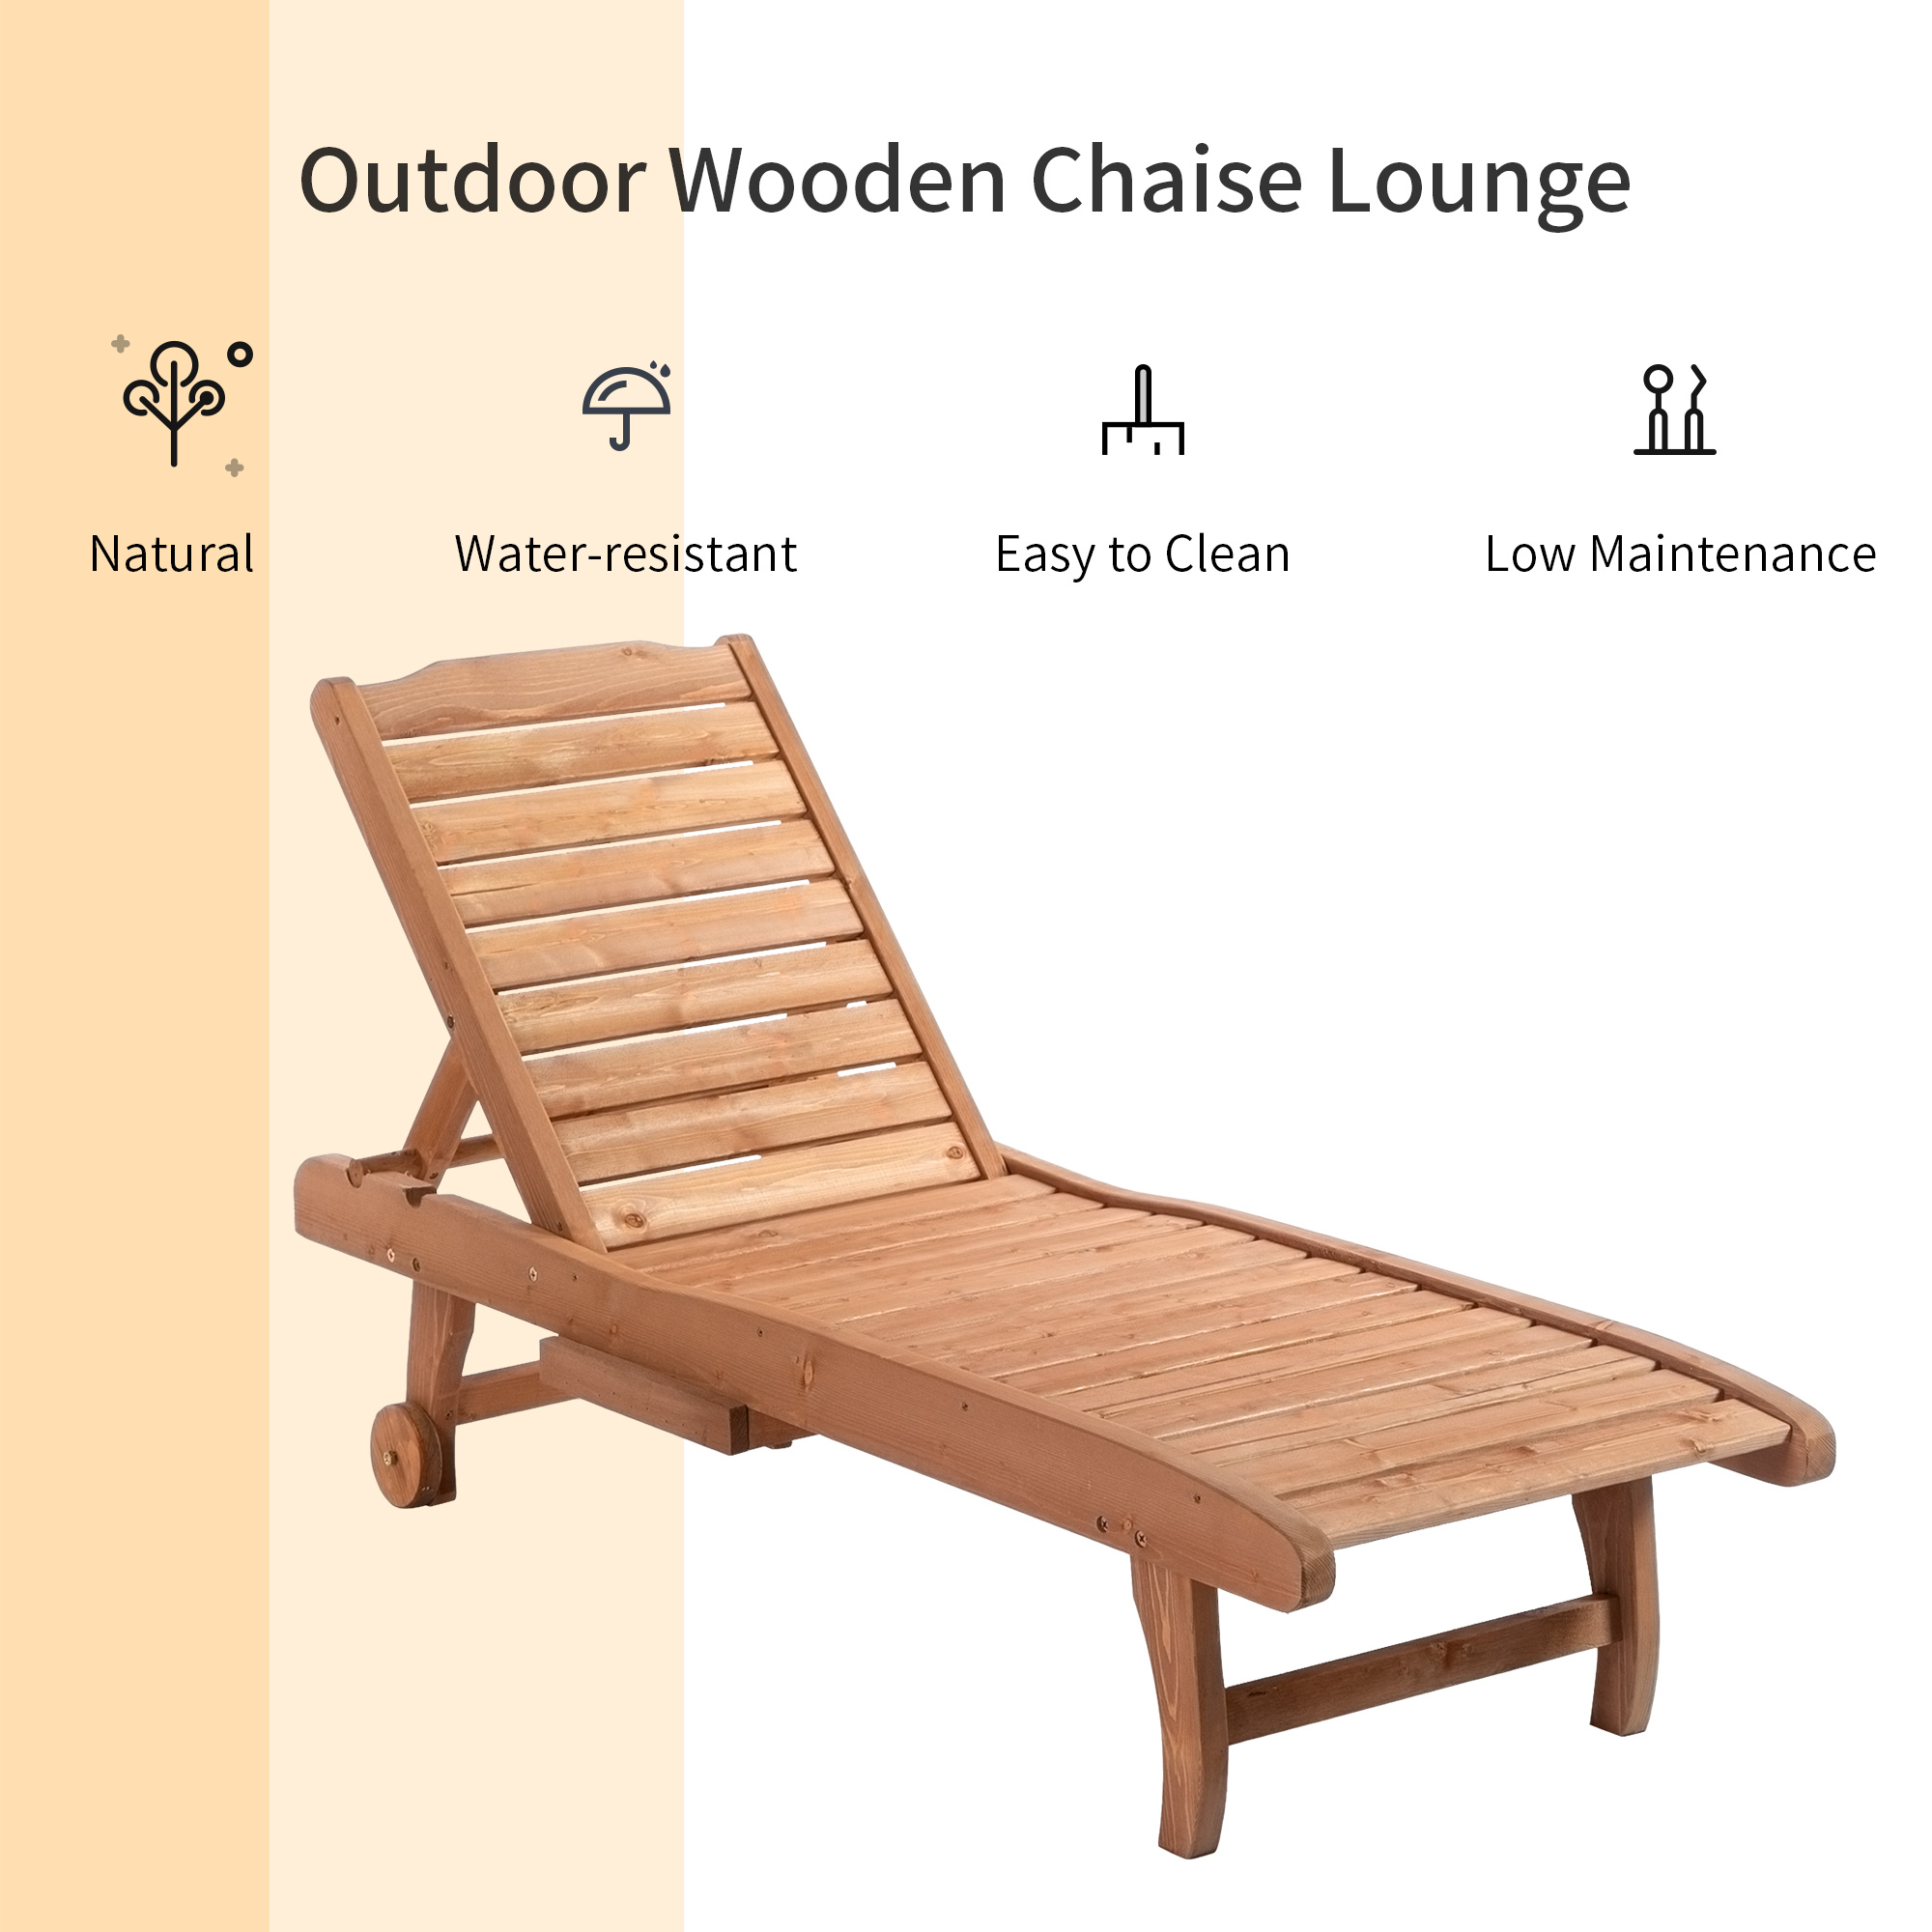 Outsunny Reclining Wood Outdoor Chaise Lounge - Brown - image 4 of 8